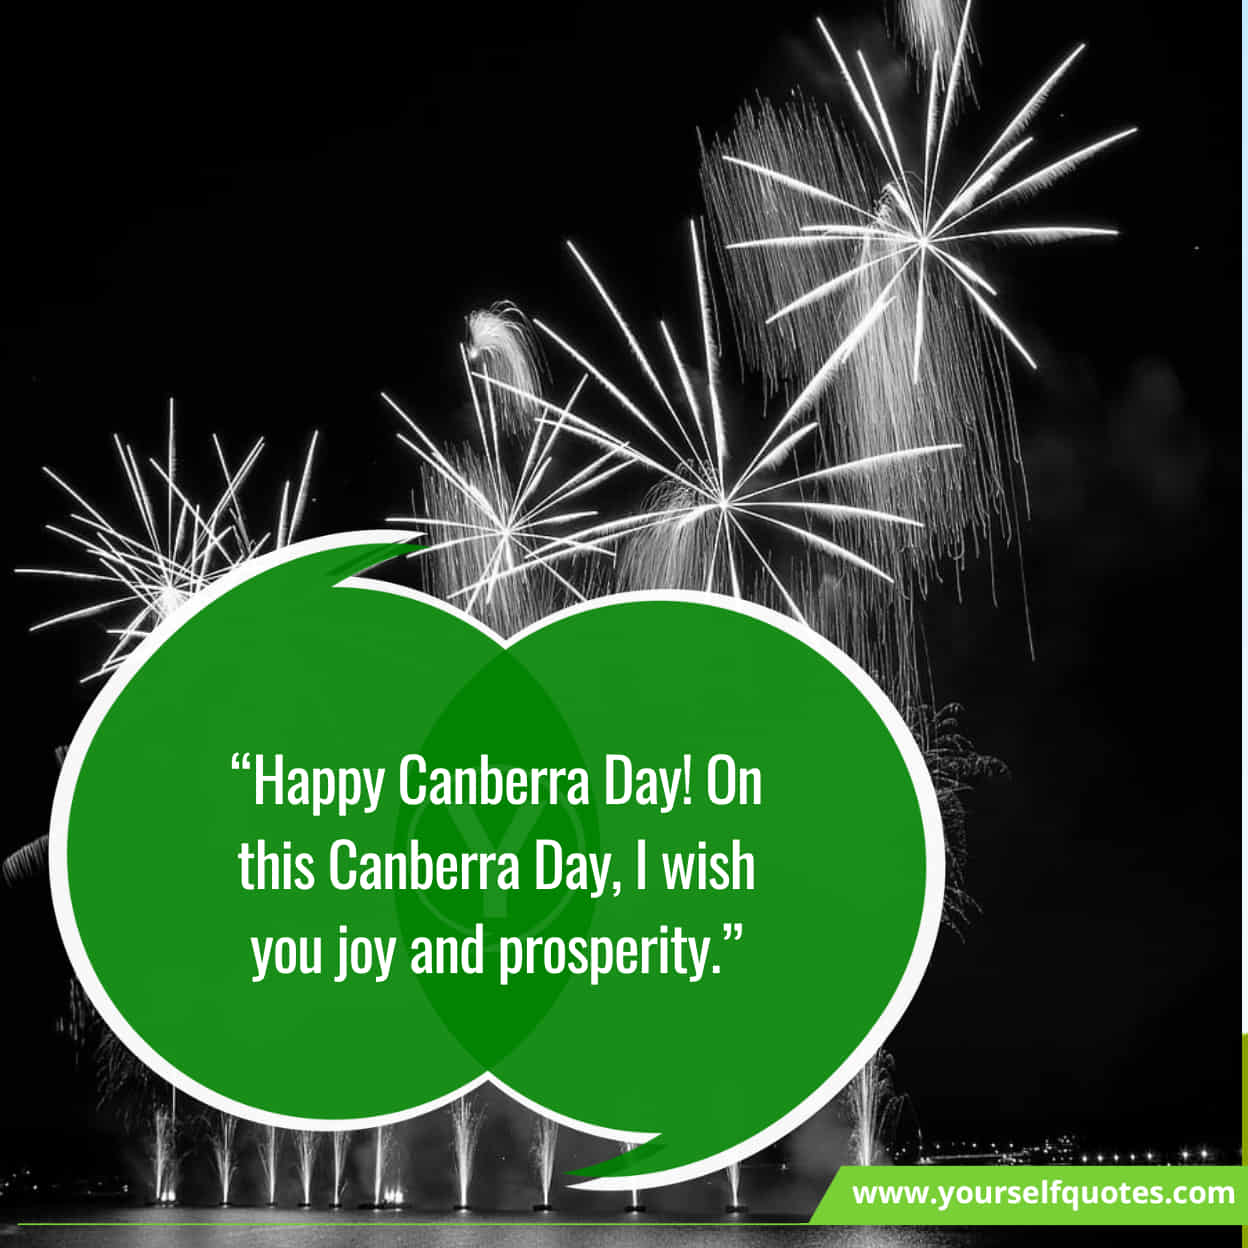 Best Wishes On Canberra Day